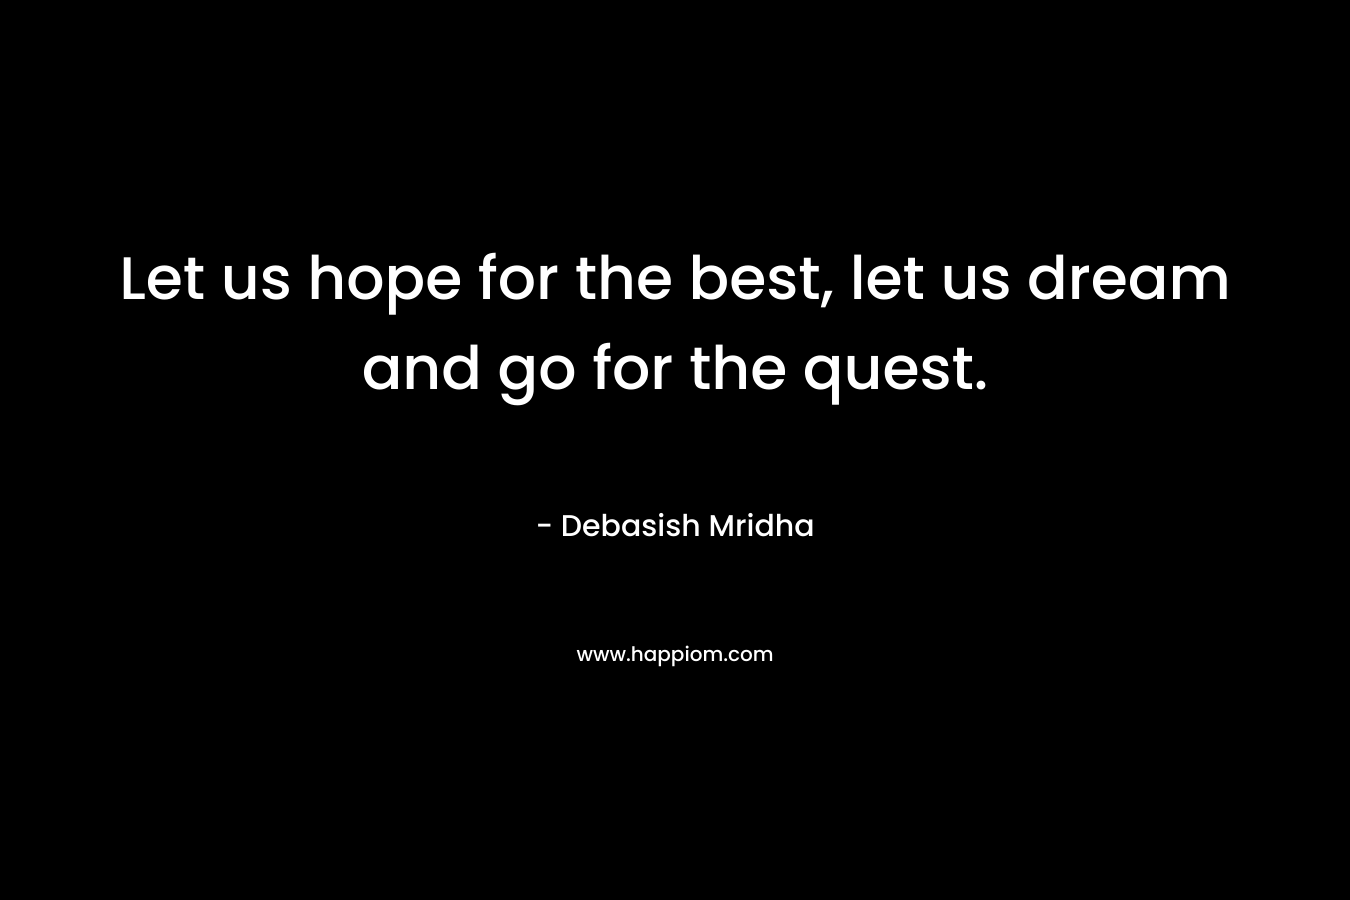 Let us hope for the best, let us dream and go for the quest.